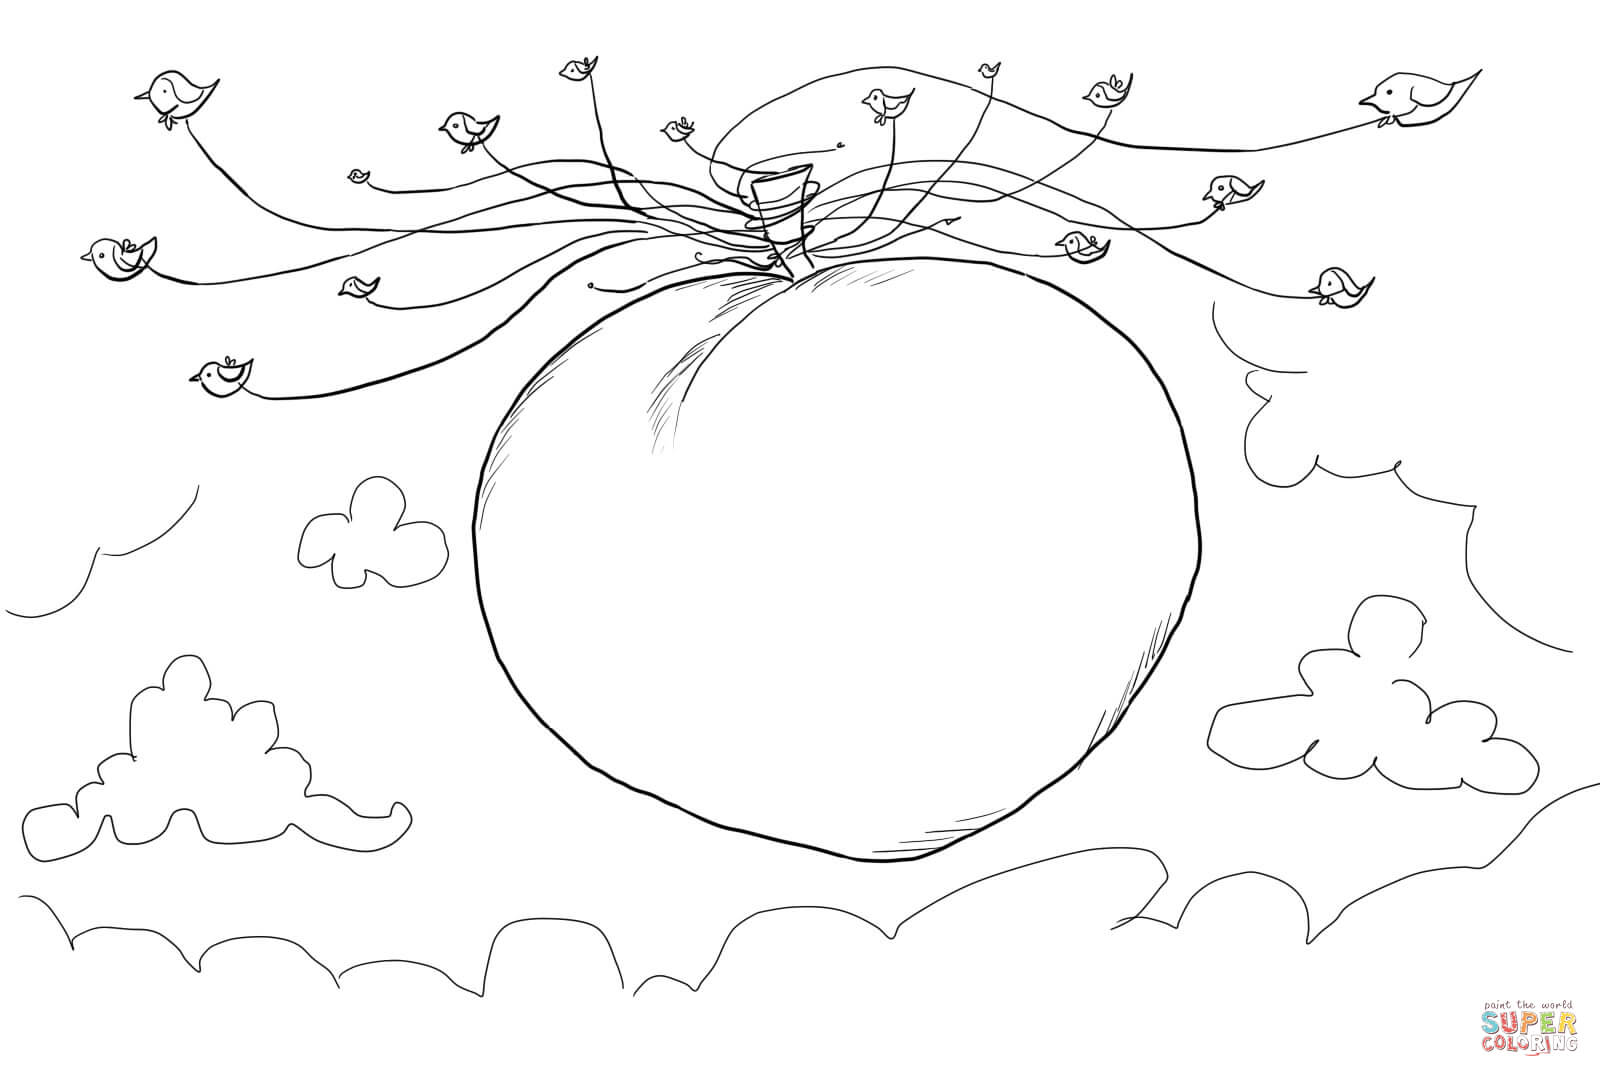 Seagulls Carrying James and the Giant Peach coloring page | Free ...